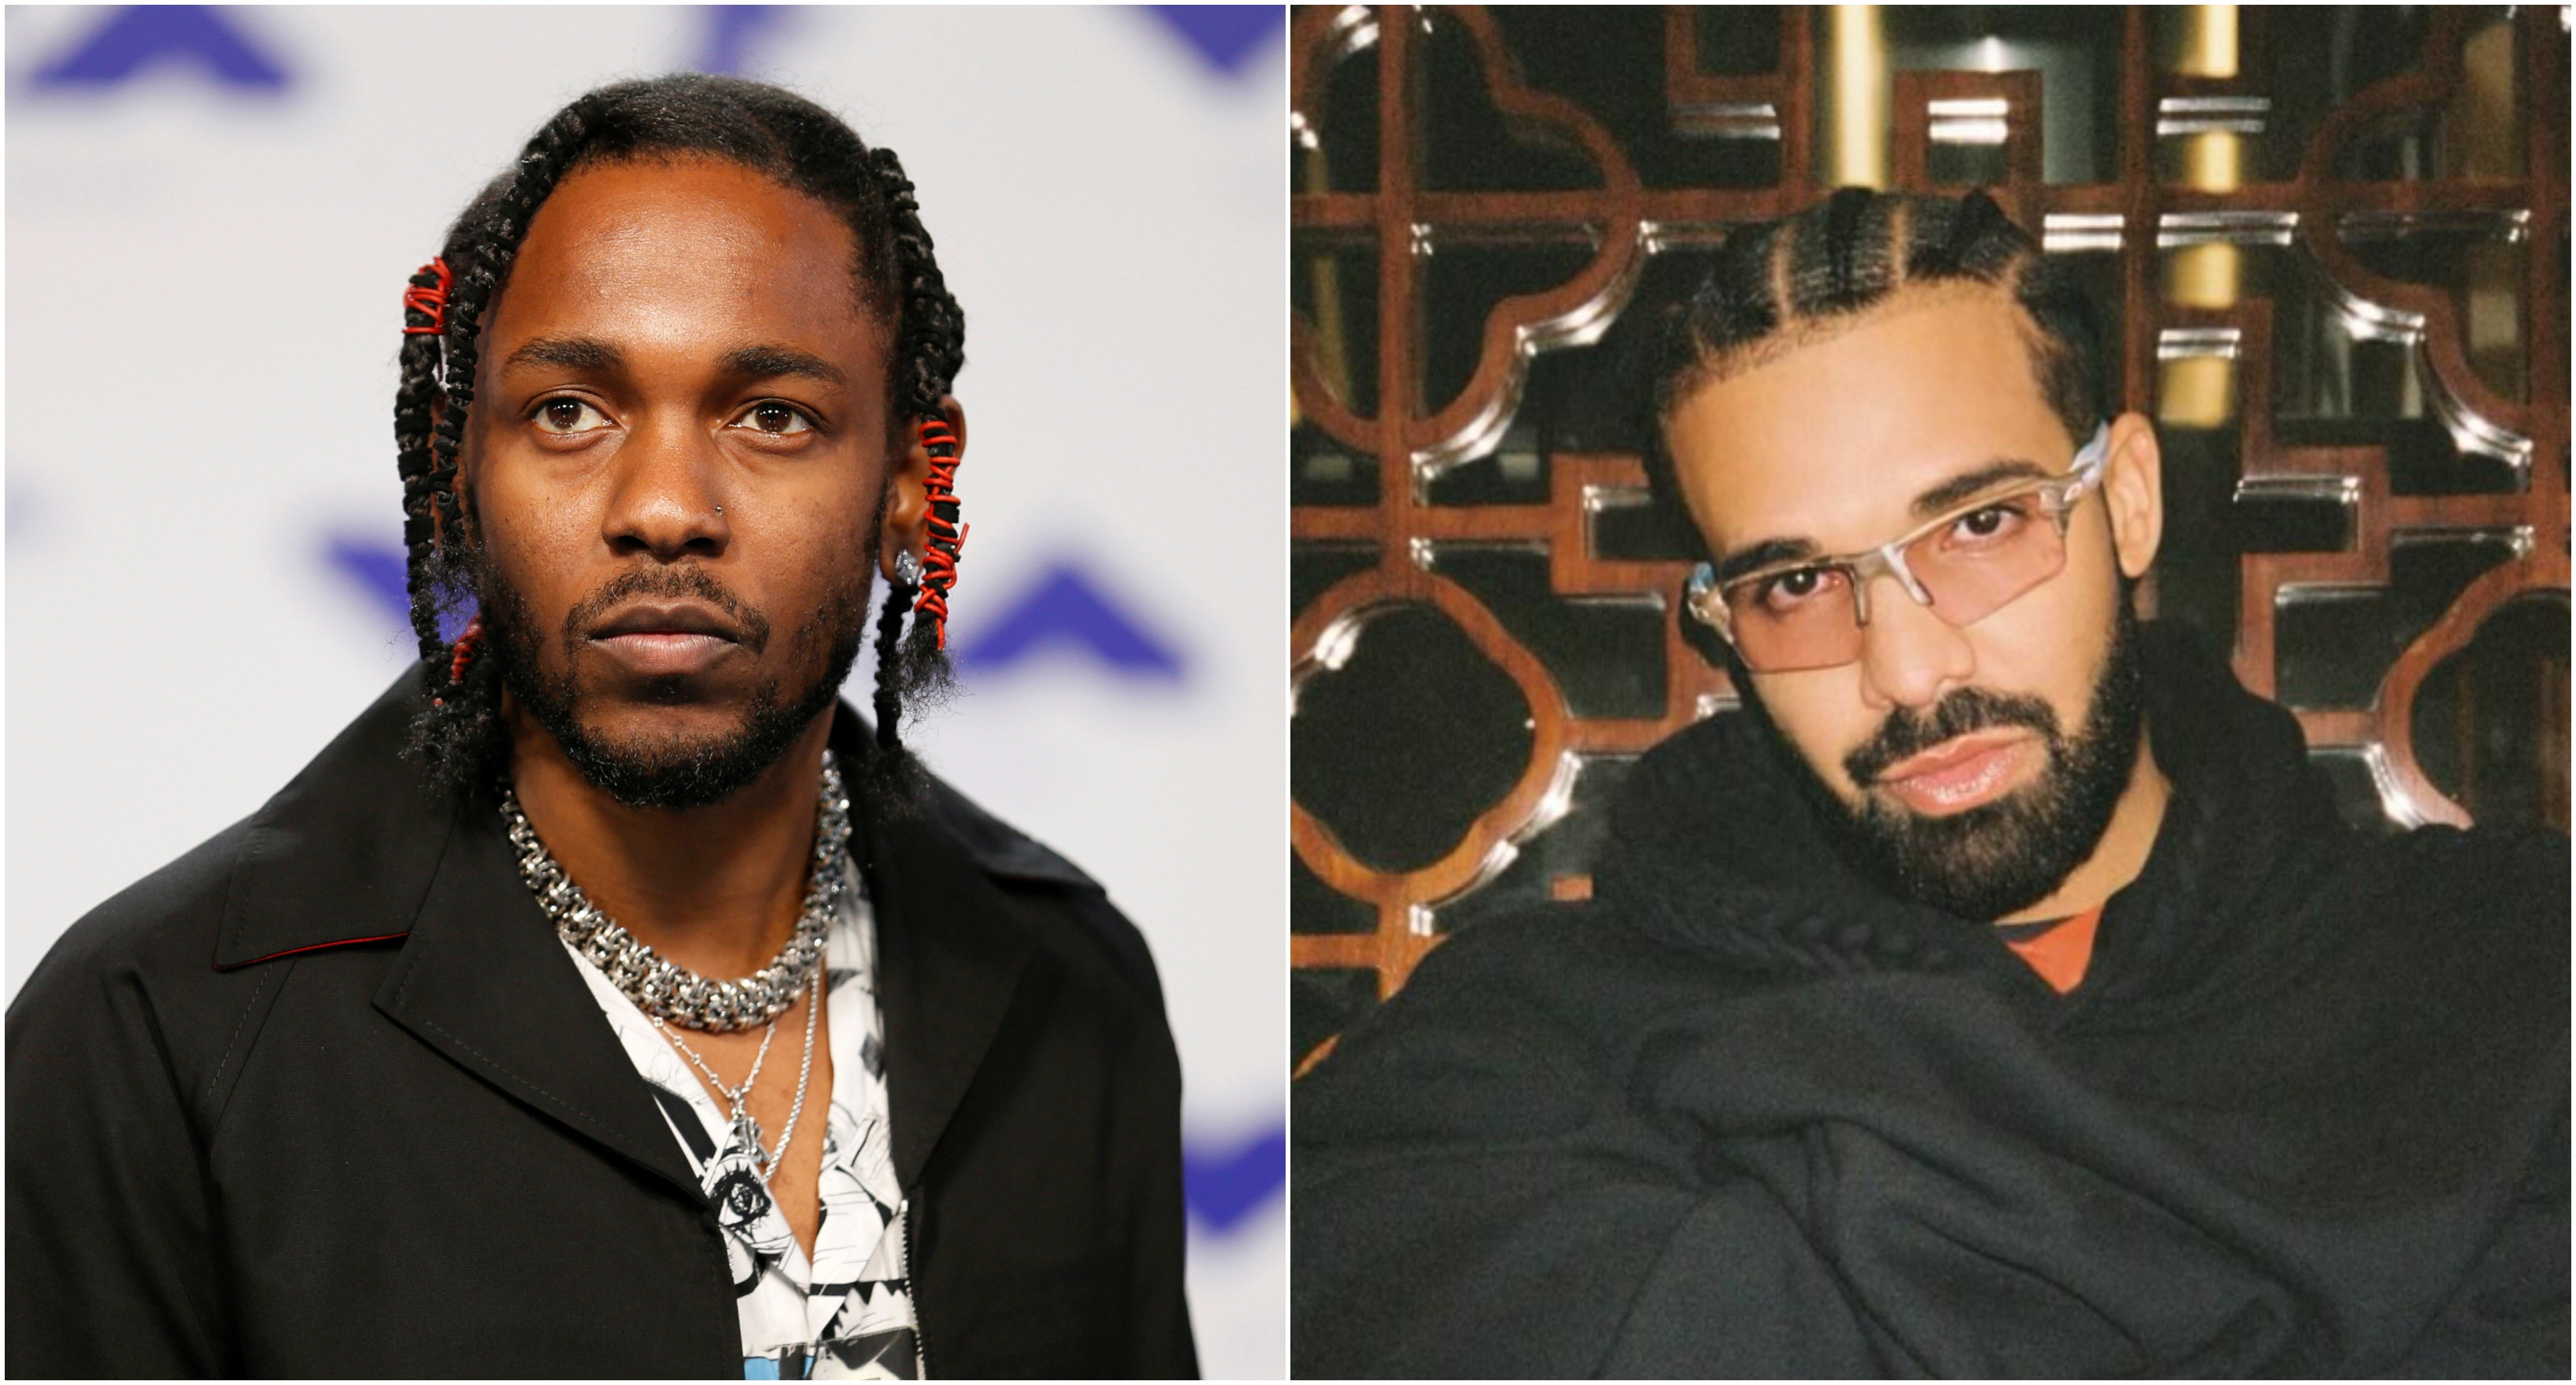 kendrick lamar courtesy reuters and drake courtesy champagnepapi on instagram